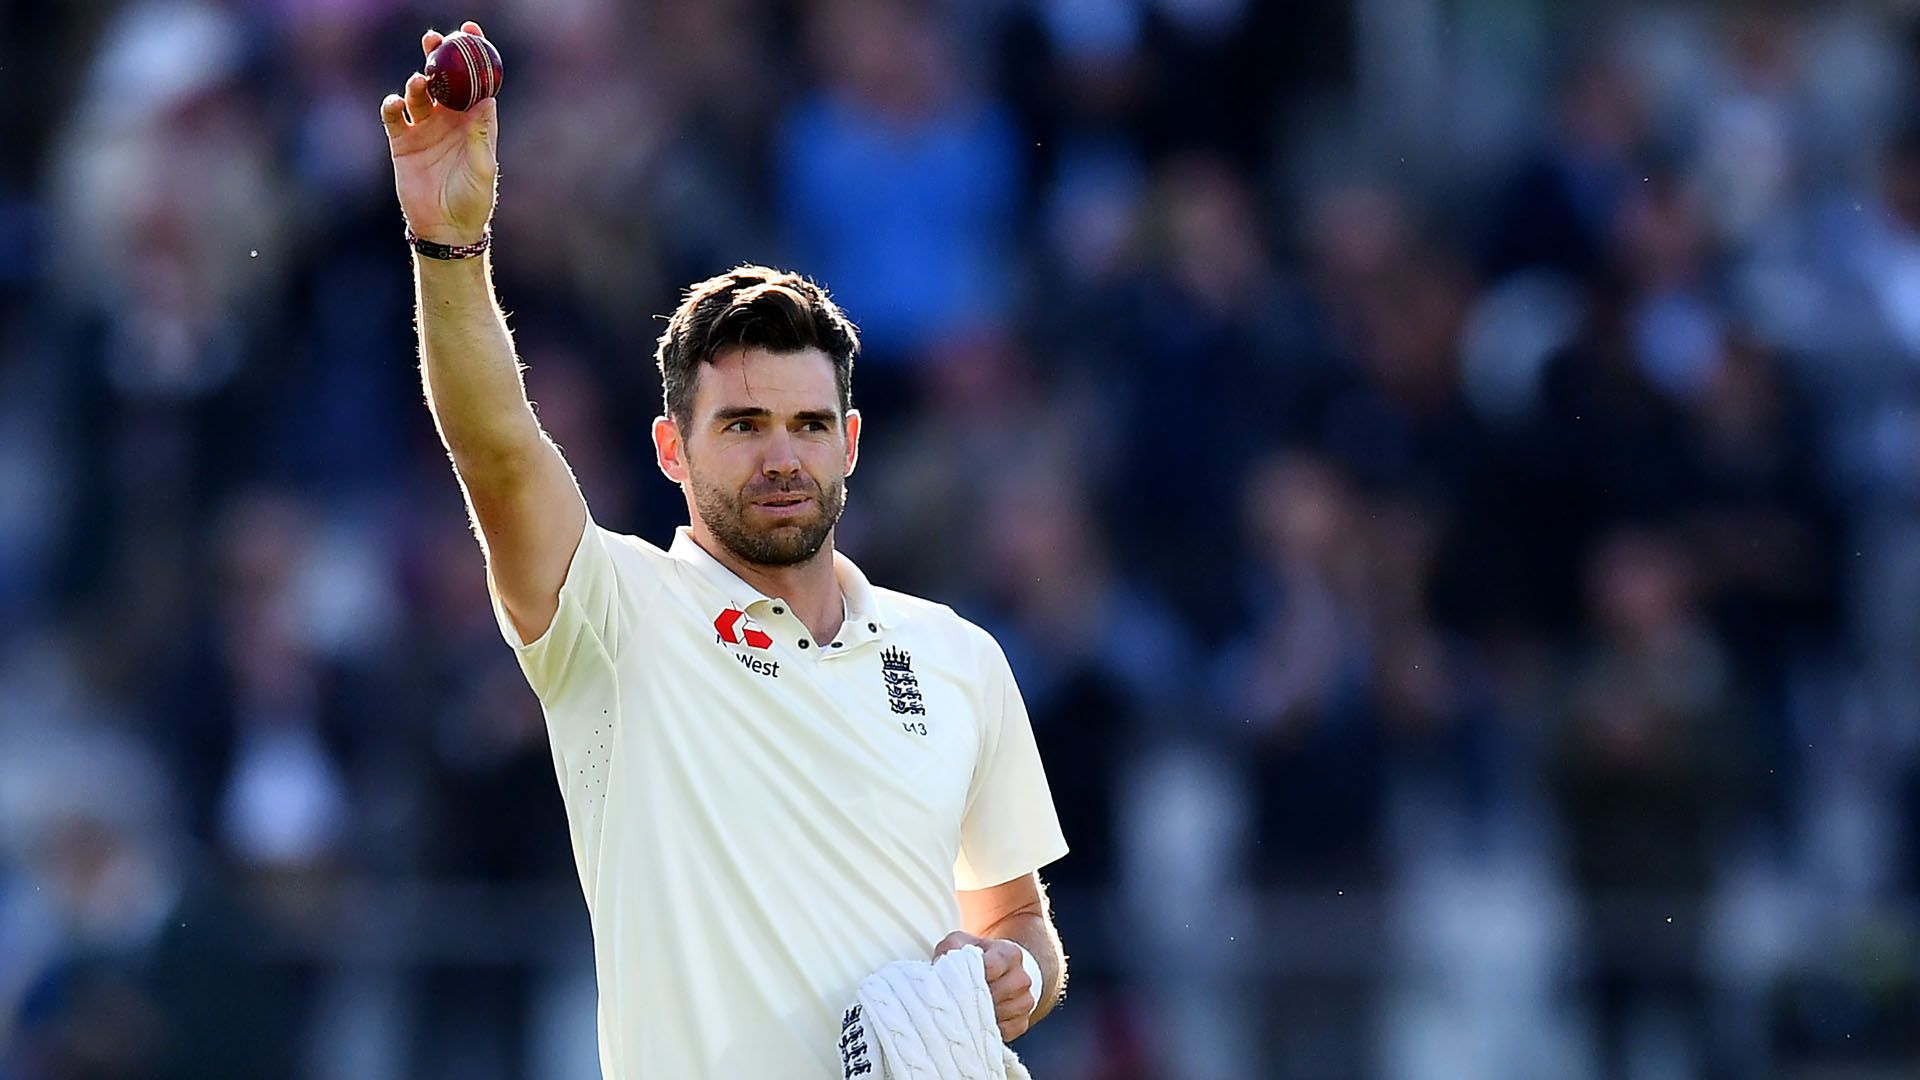 Jimmy Anderson: The Road to 500